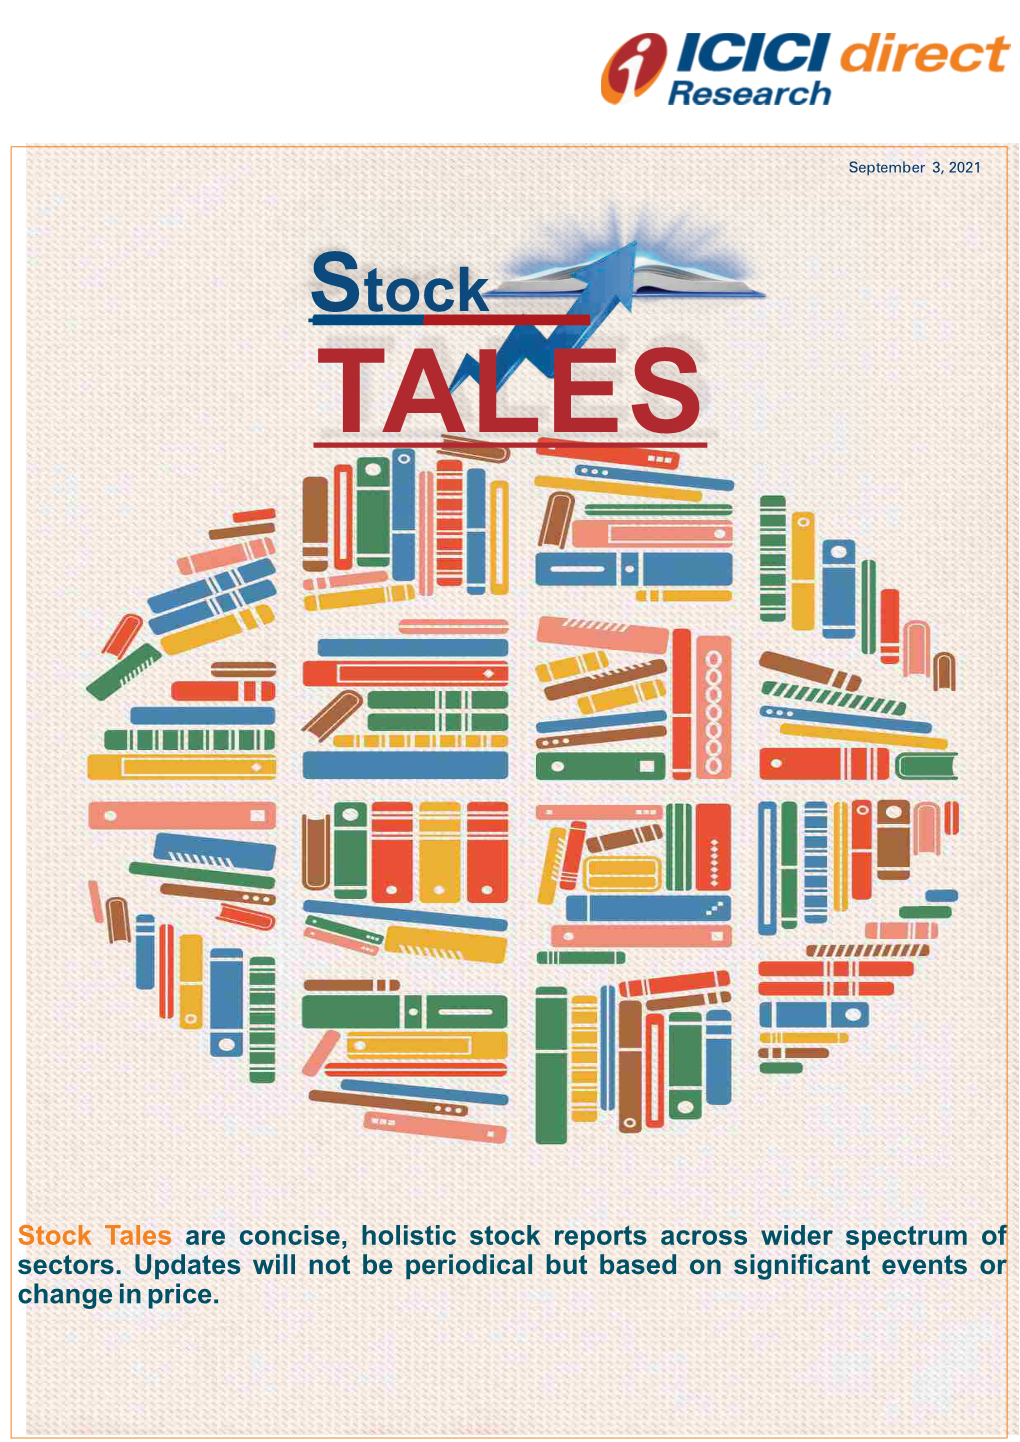 Stock Tales Are Concise, Holistic Stock Reports Across Wider Spectrum of Sectors